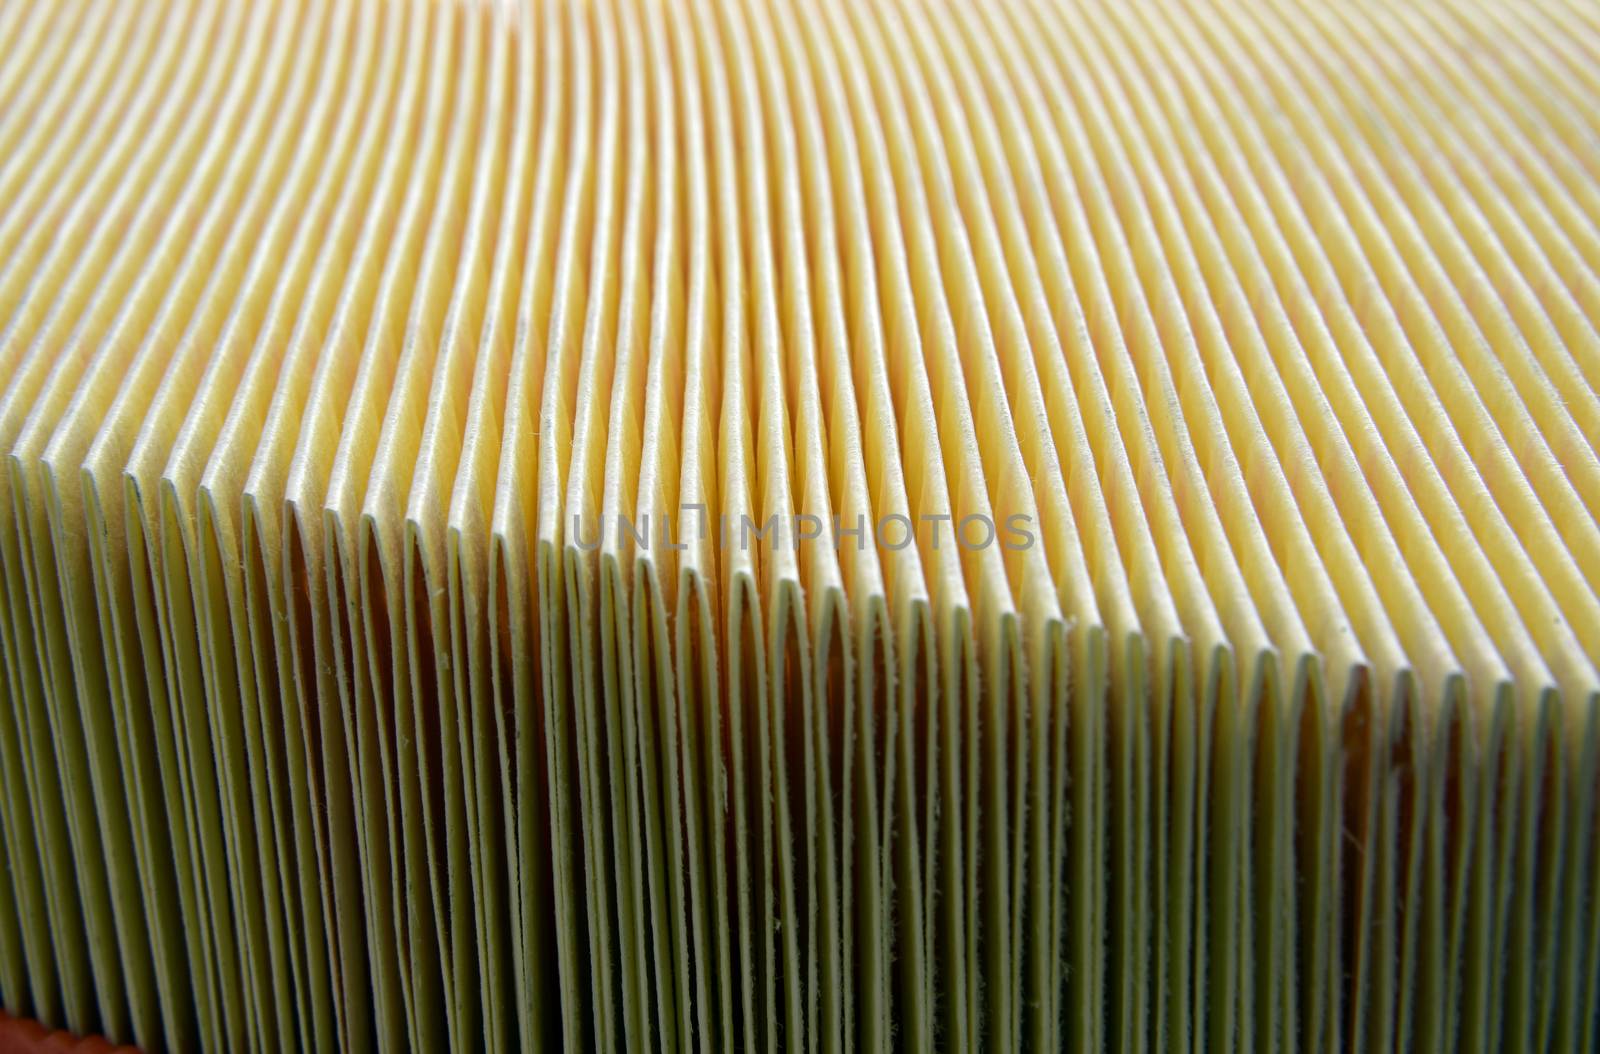 enlarged detail of the automotive air filter